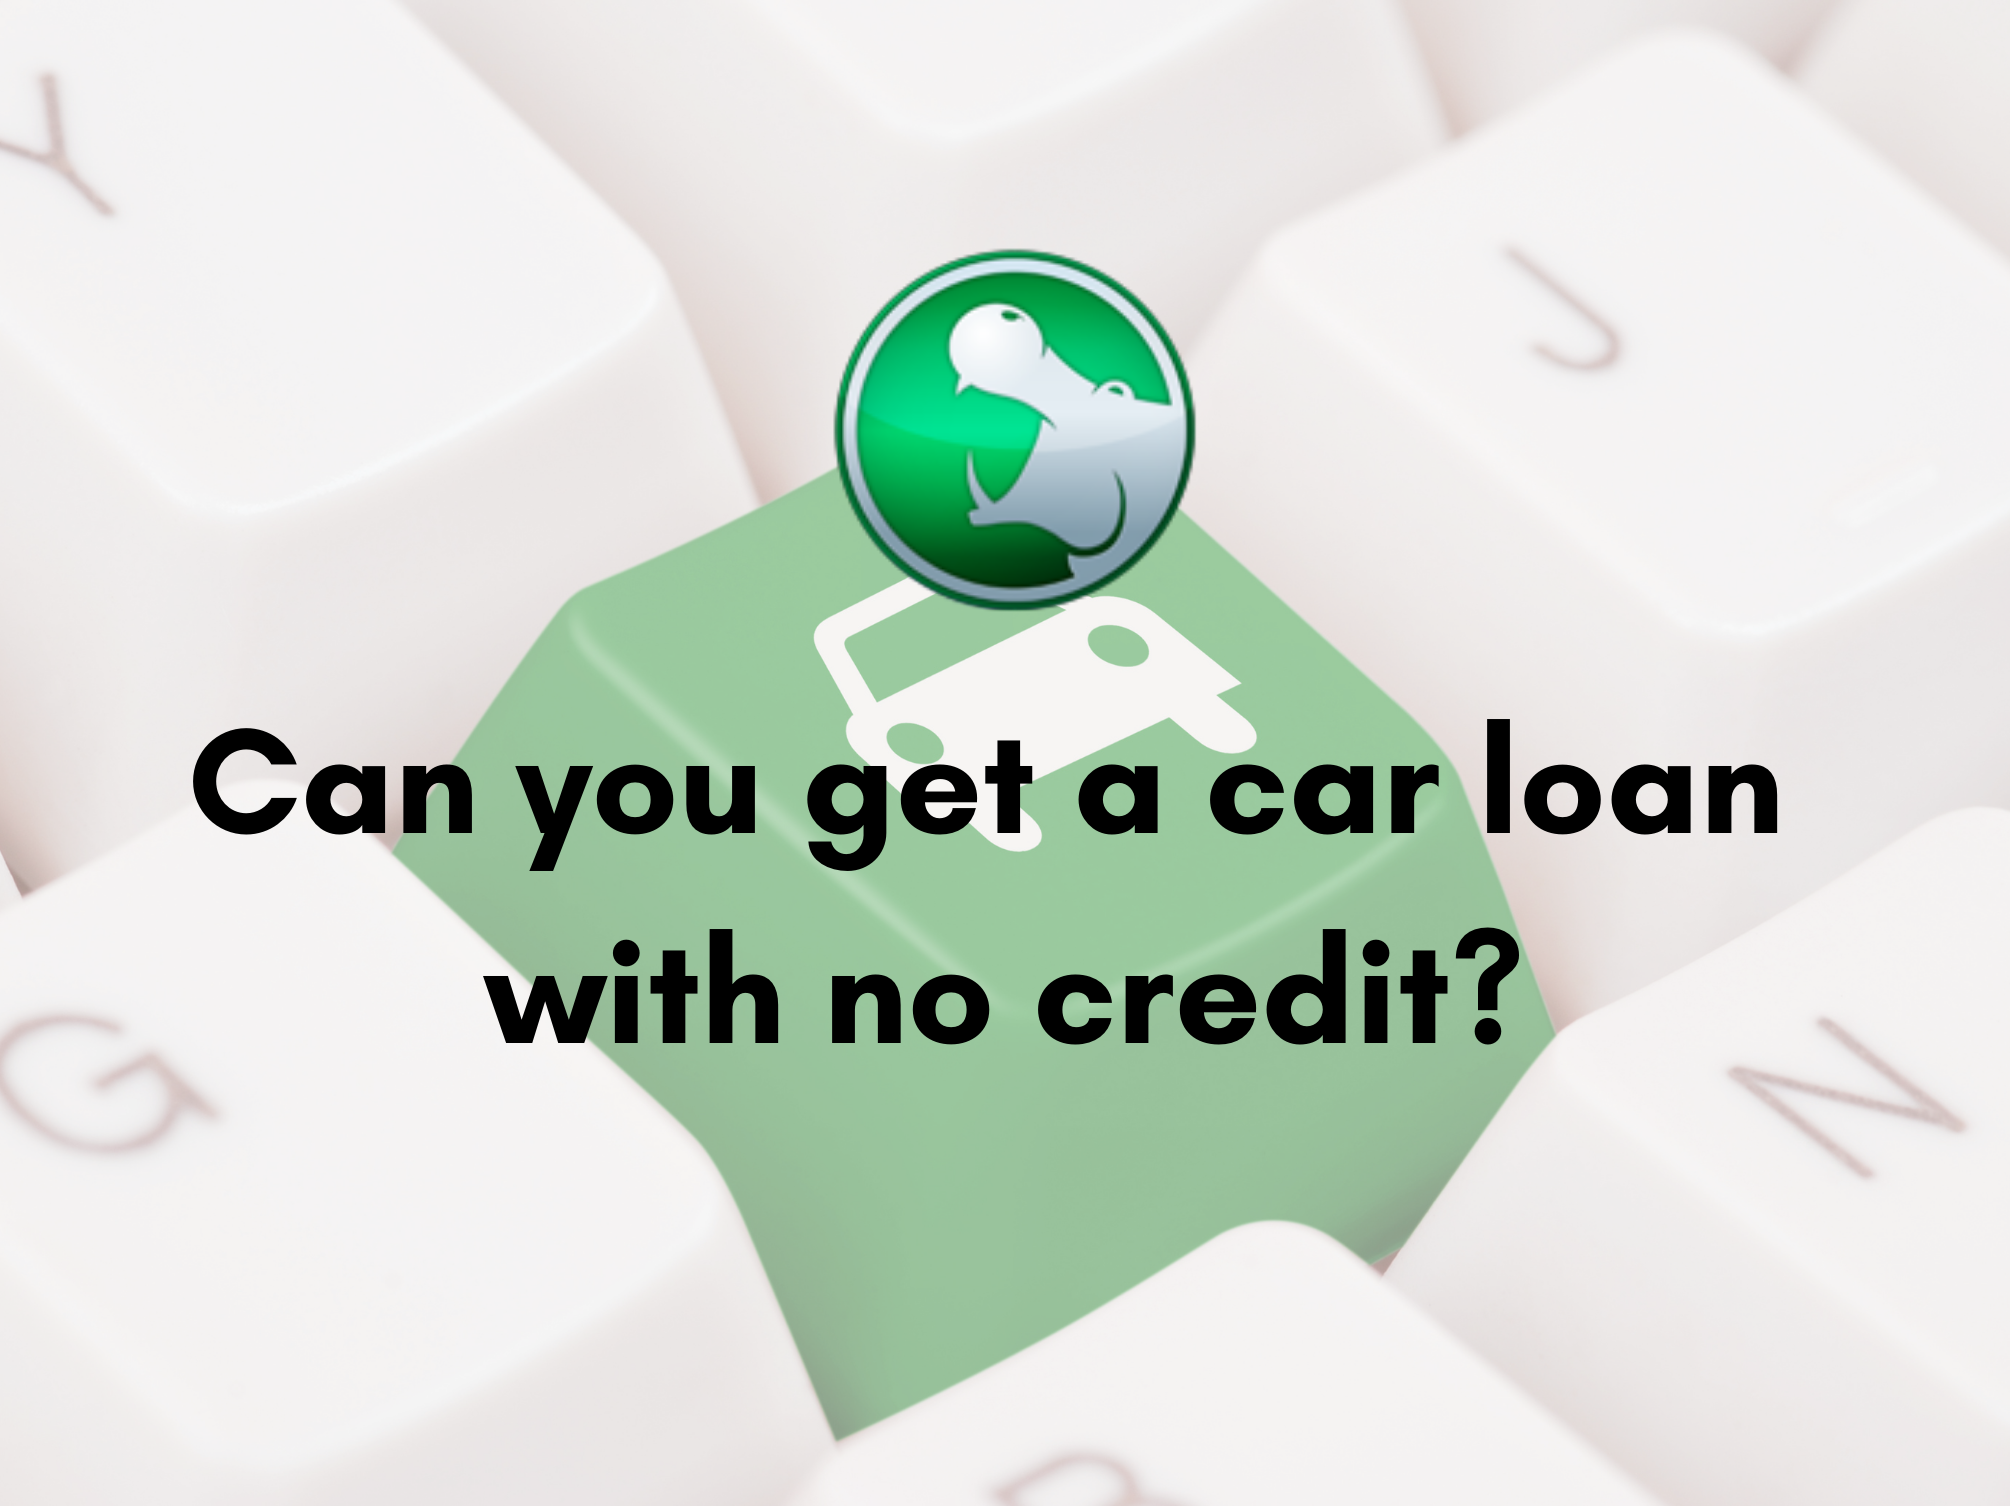 Can you get a car loan with no credit?